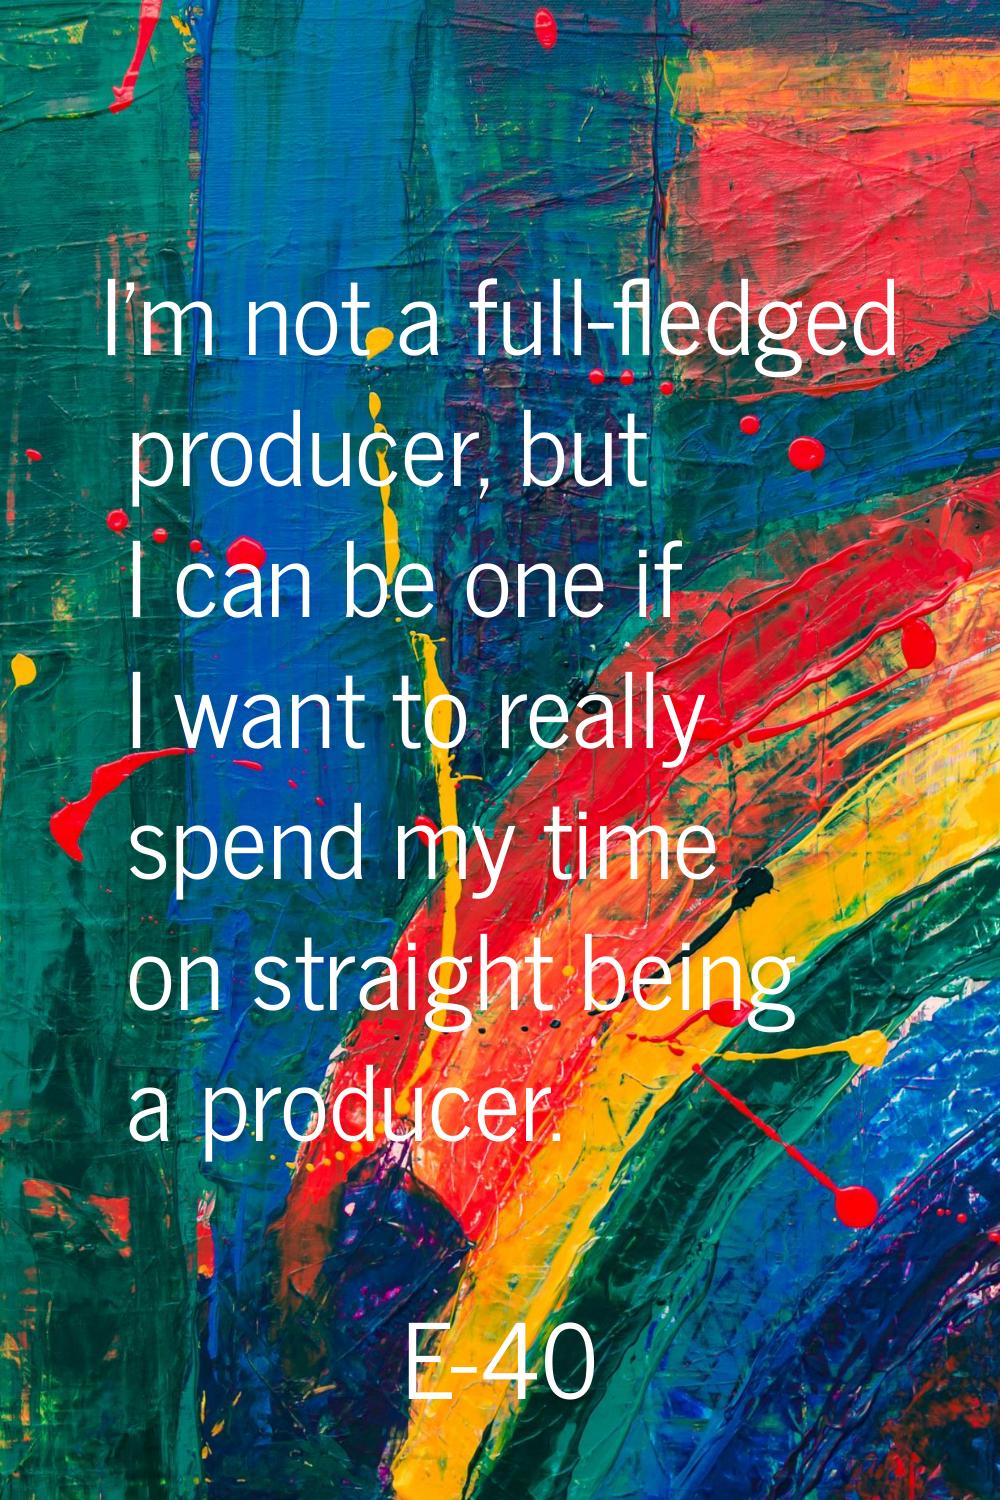 I'm not a full-fledged producer, but I can be one if I want to really spend my time on straight bei